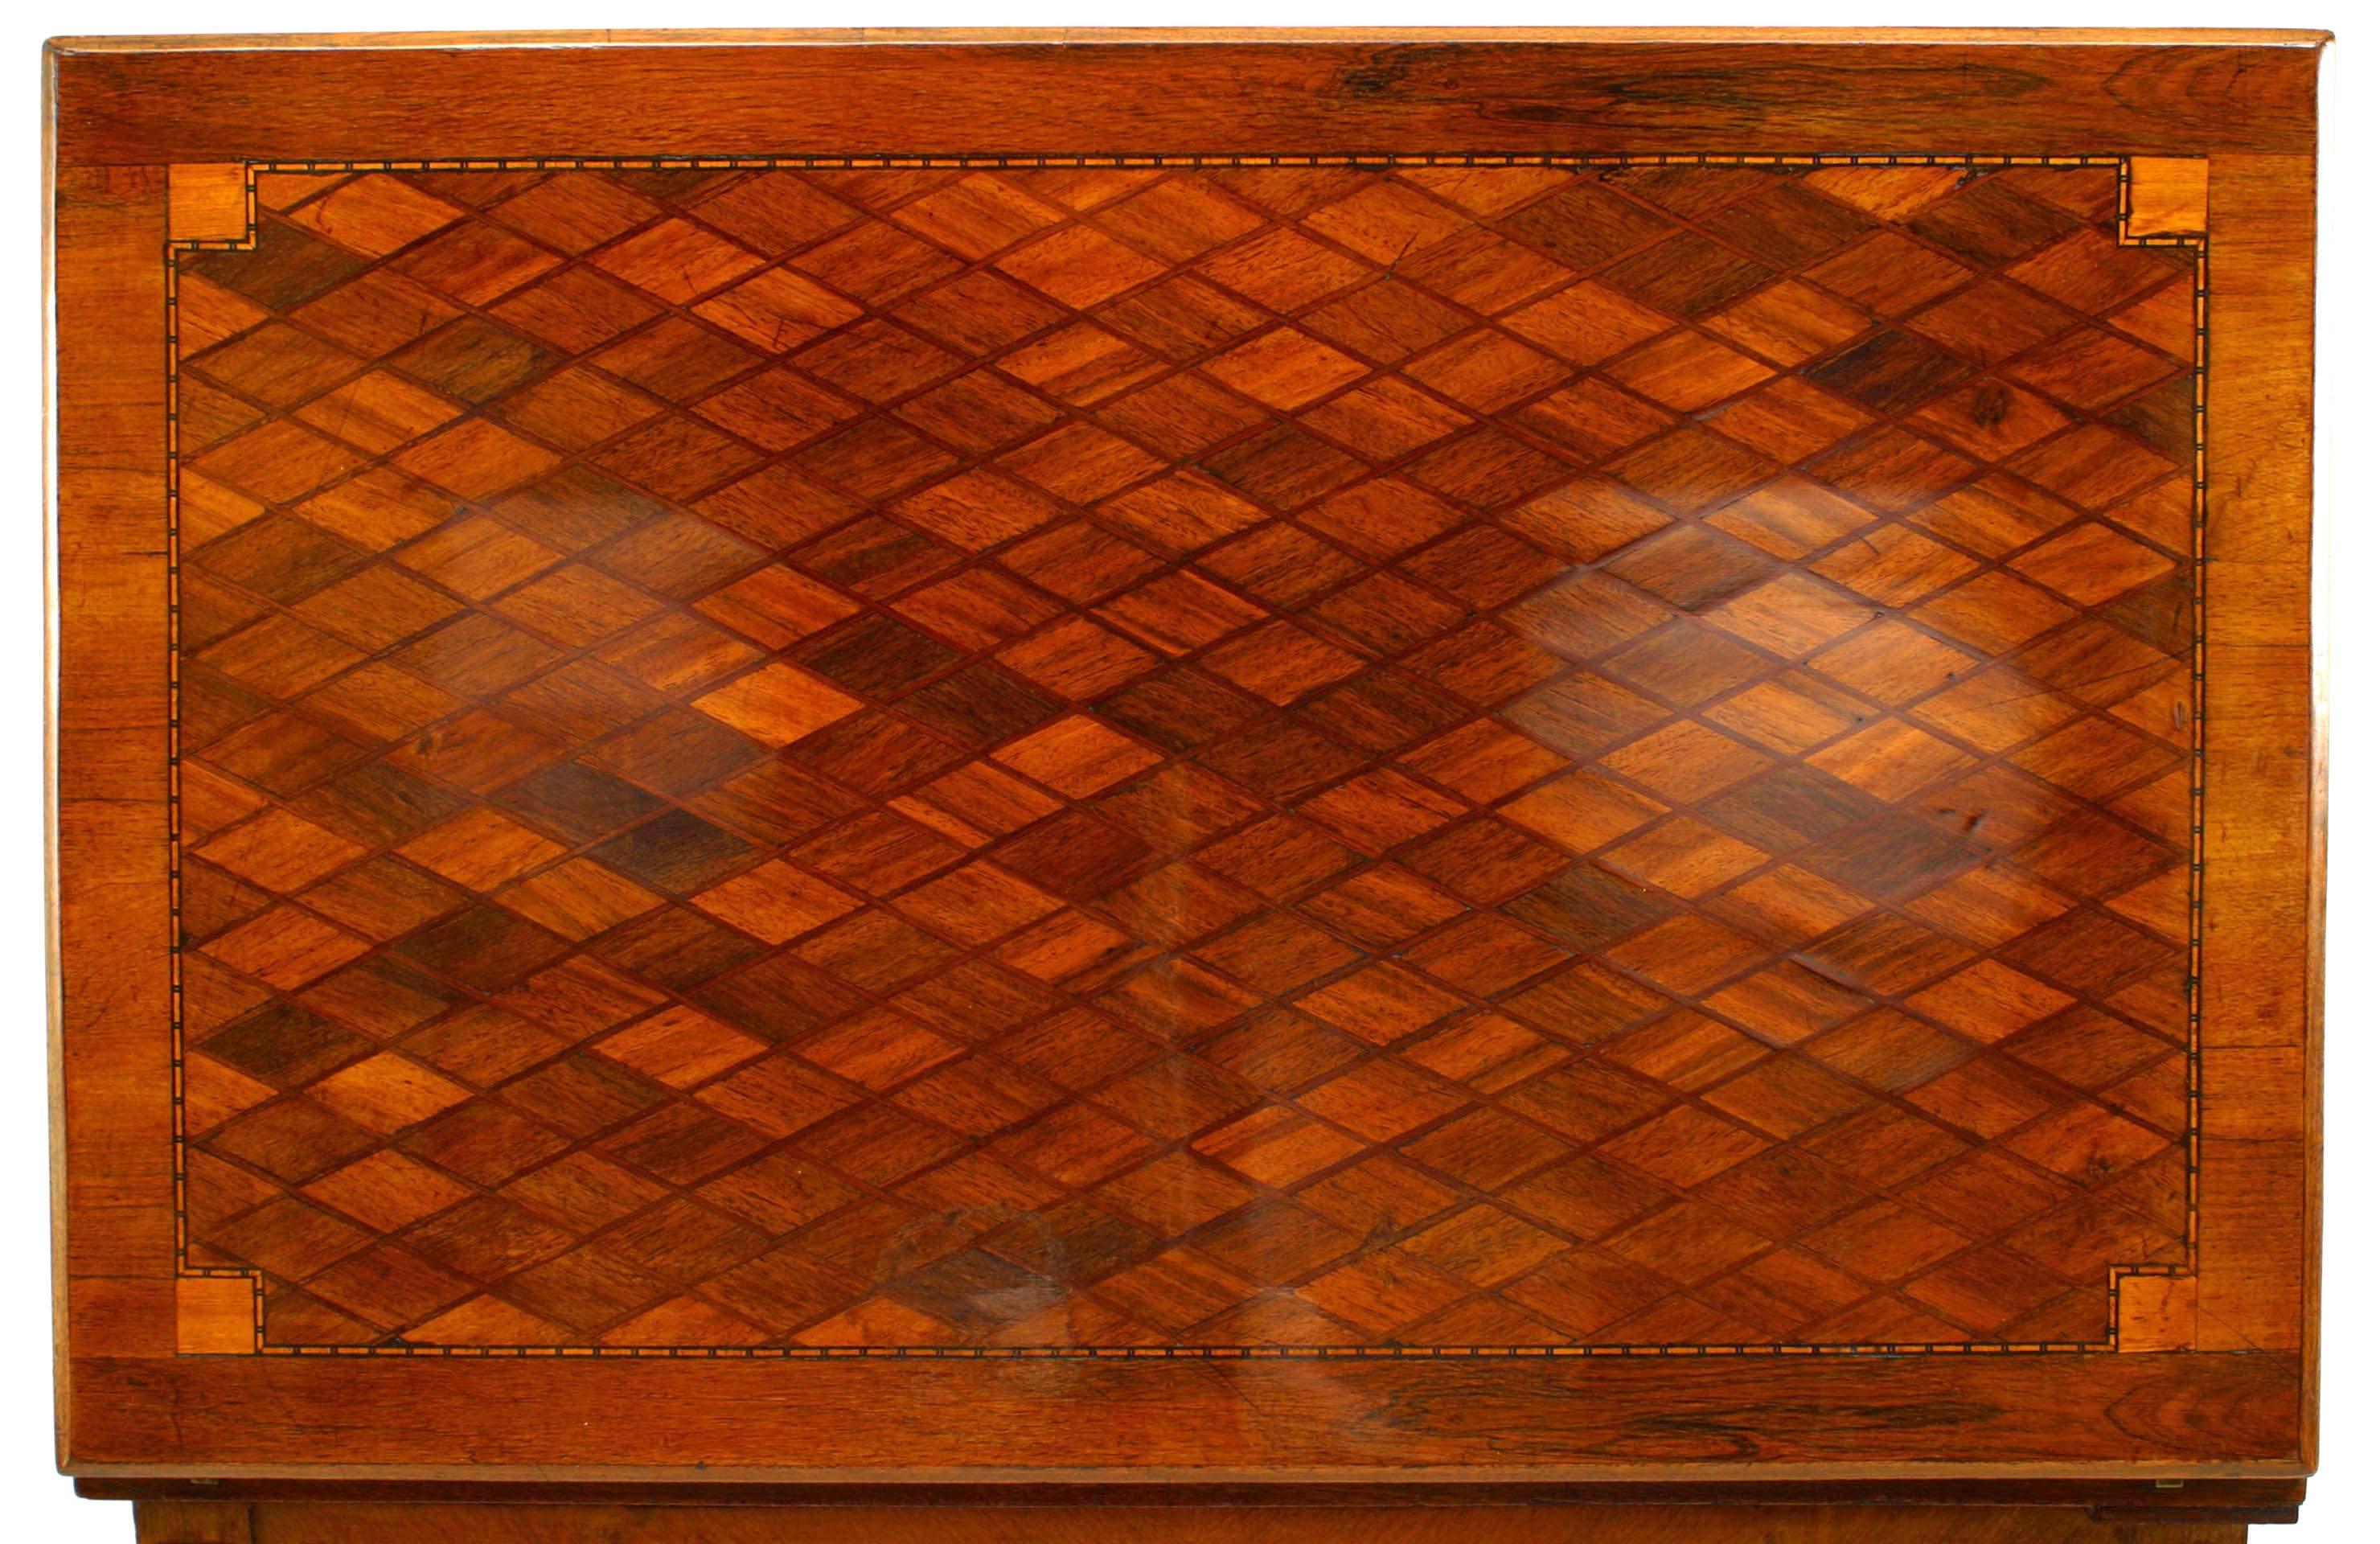 French Louis XVI style (19th Century) fruitwood and parquetry inlaid rectangular flip top game table having a backgammon, dice, and roulette wheel interior well
